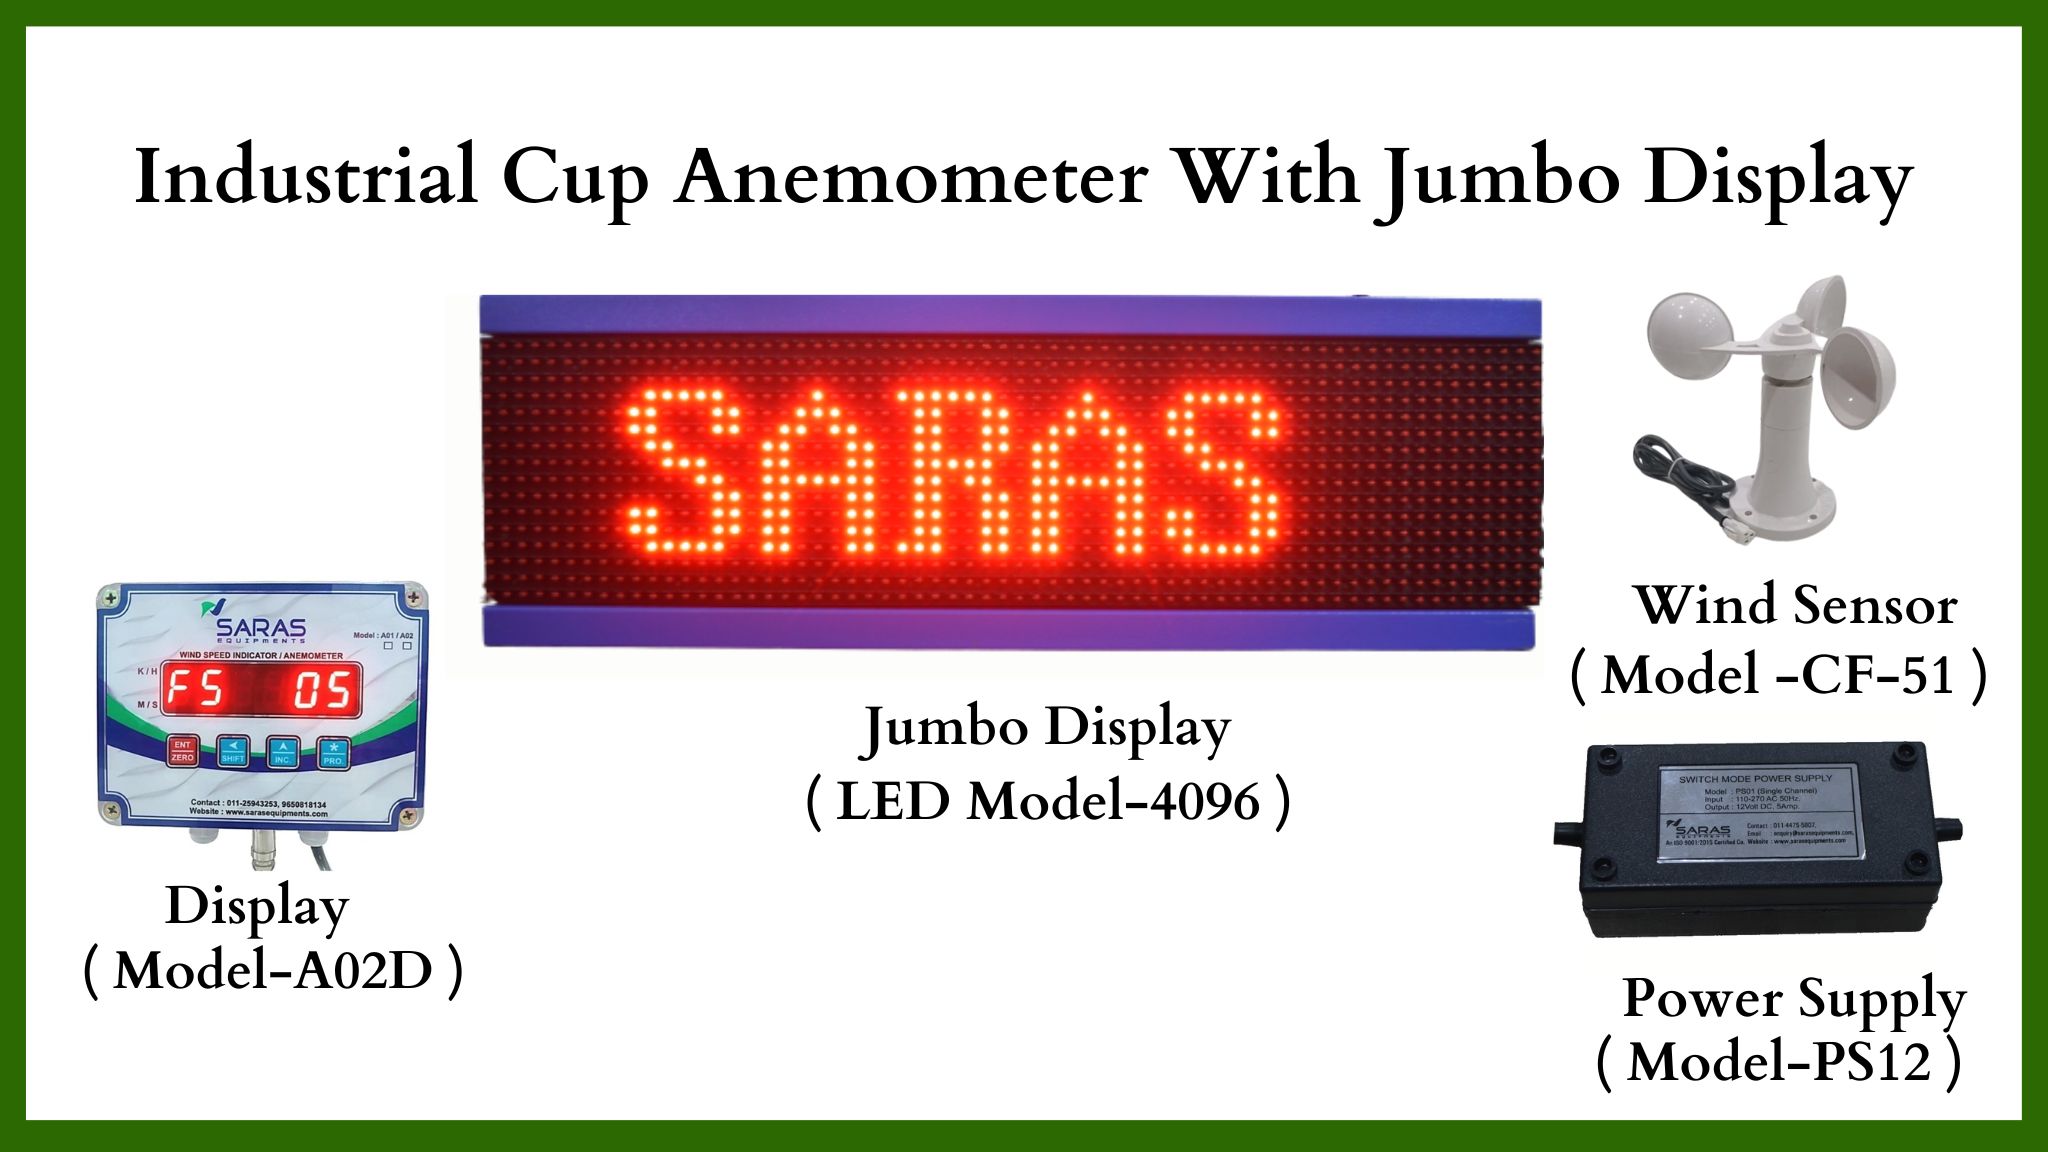 Industrial Cup Anemometer with Jumbo Display